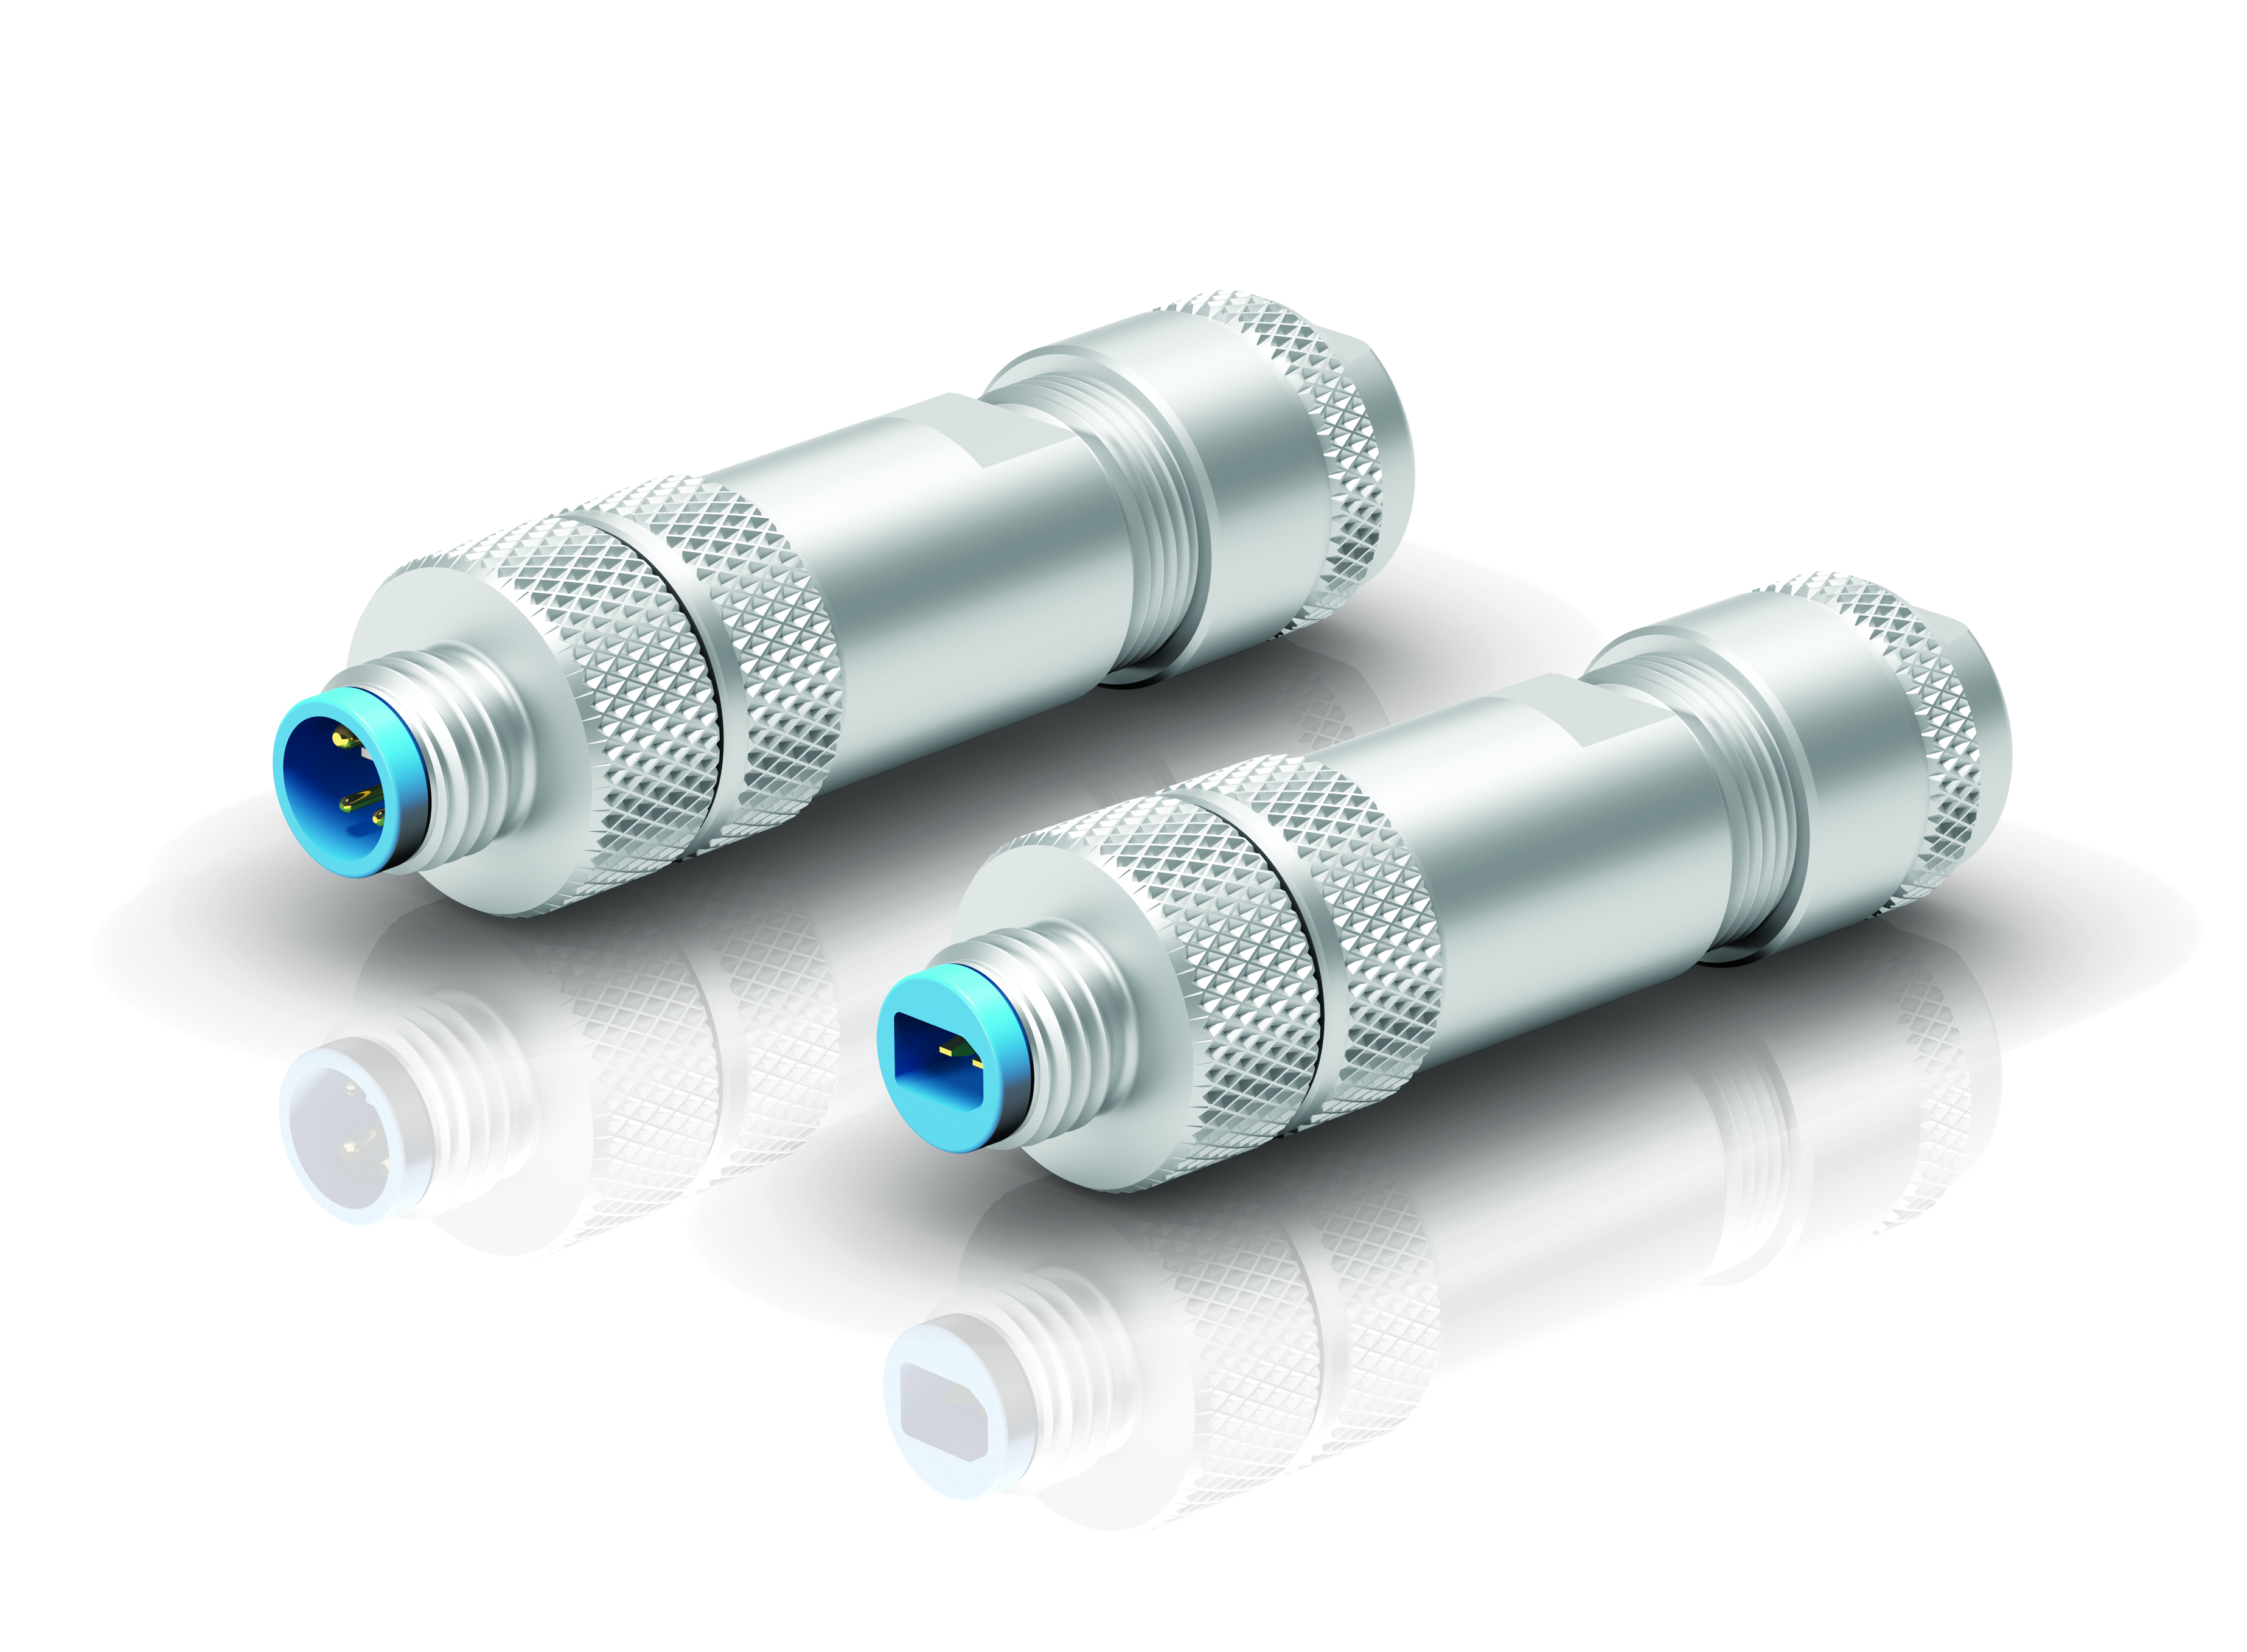 Field-Wireable M8 Connectors for Single-Pair Ethernet